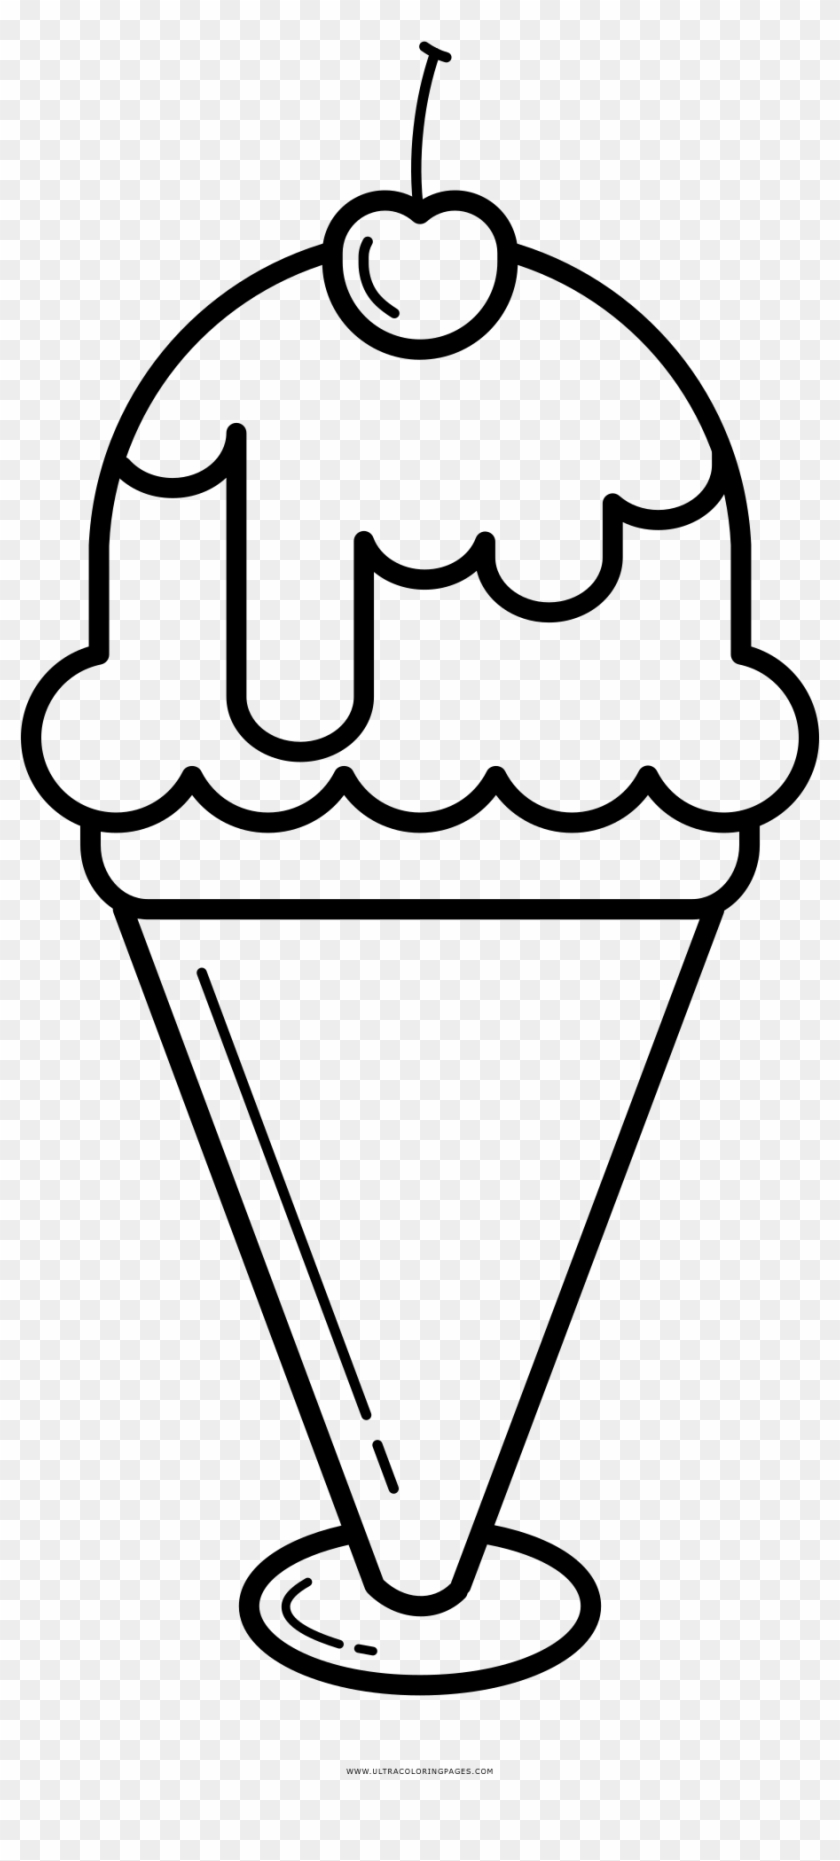 Download Ice Cream Sundae Coloring Page Internet Logo Transparent Background Hd Png Download 1000x2073 3095534 Pngfind